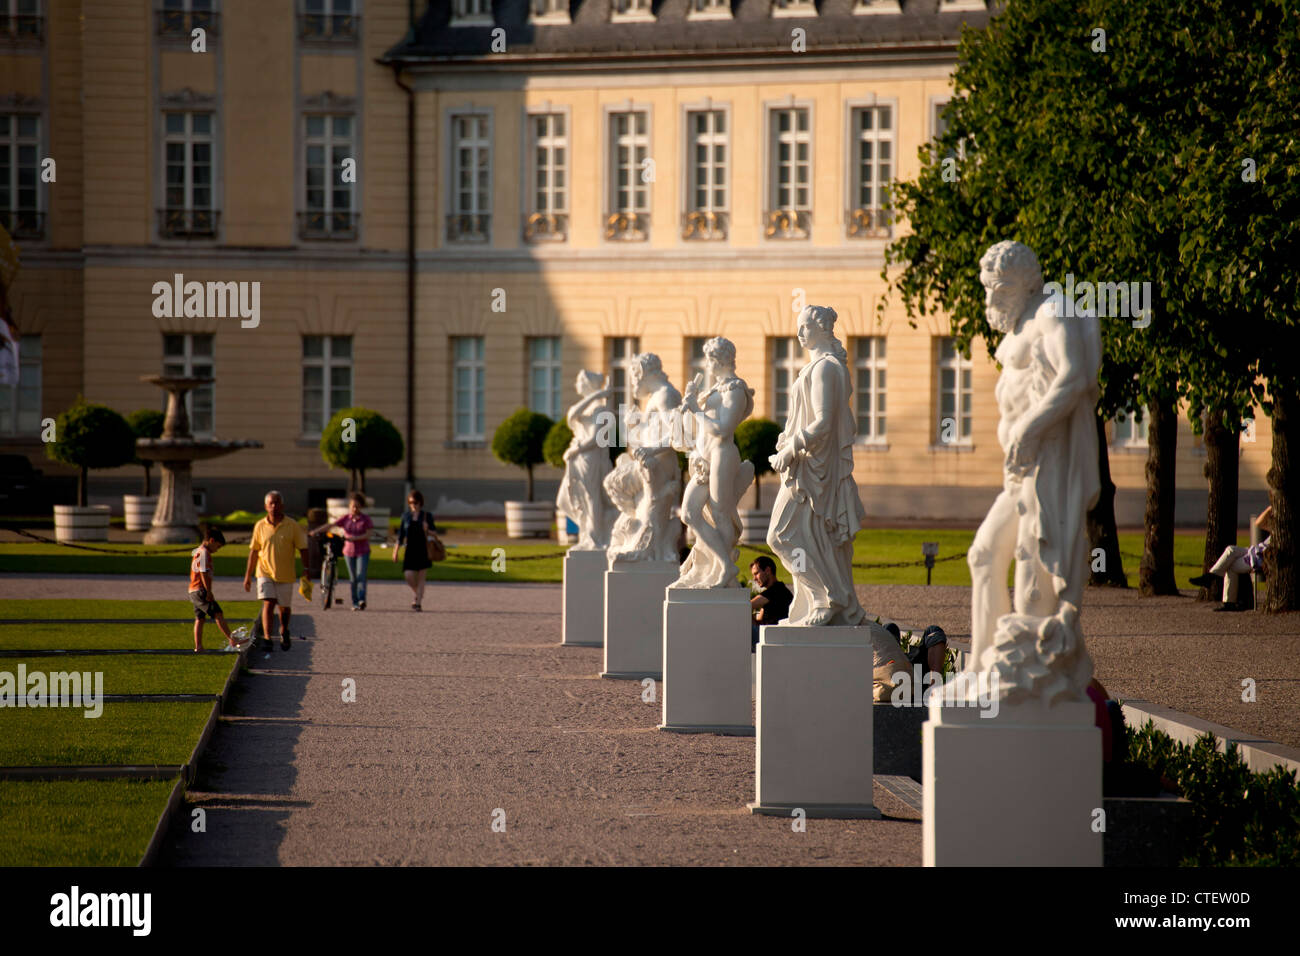 Statues in front of the Karlsruhe Palace, Baden-Württemberg, Germany Stock Photo